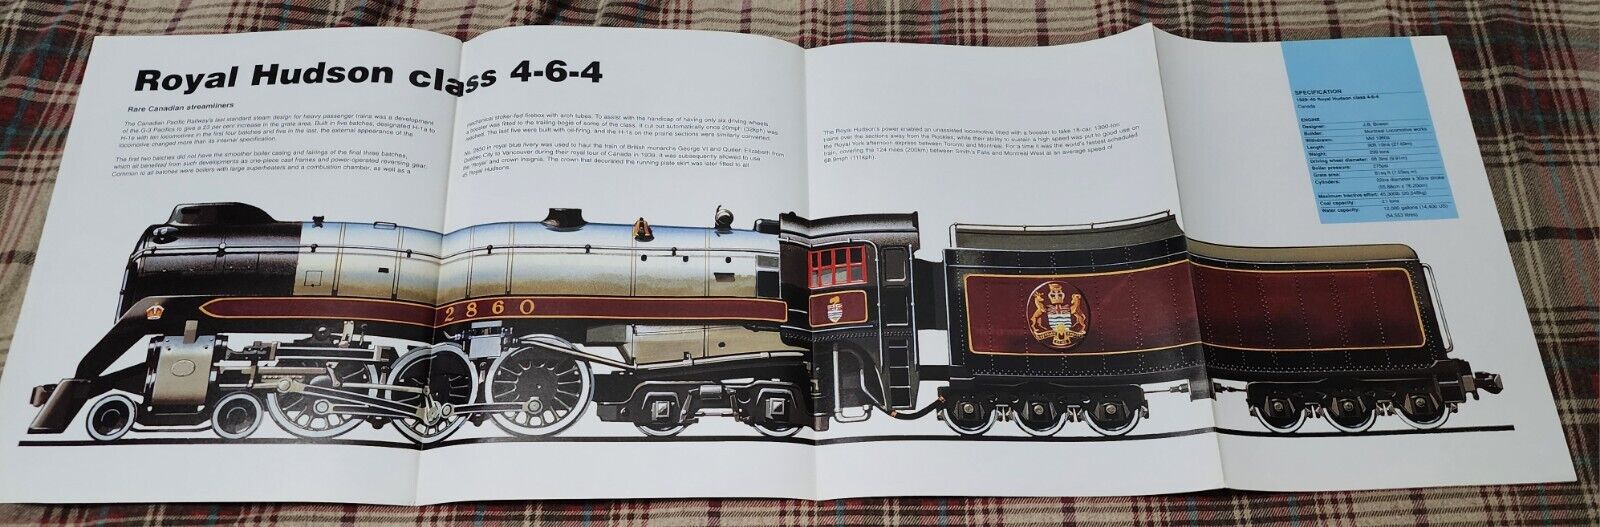 OUT OF PRINT ~ Canadian Pacific Railroad Train Locomotive Illustrated Poster